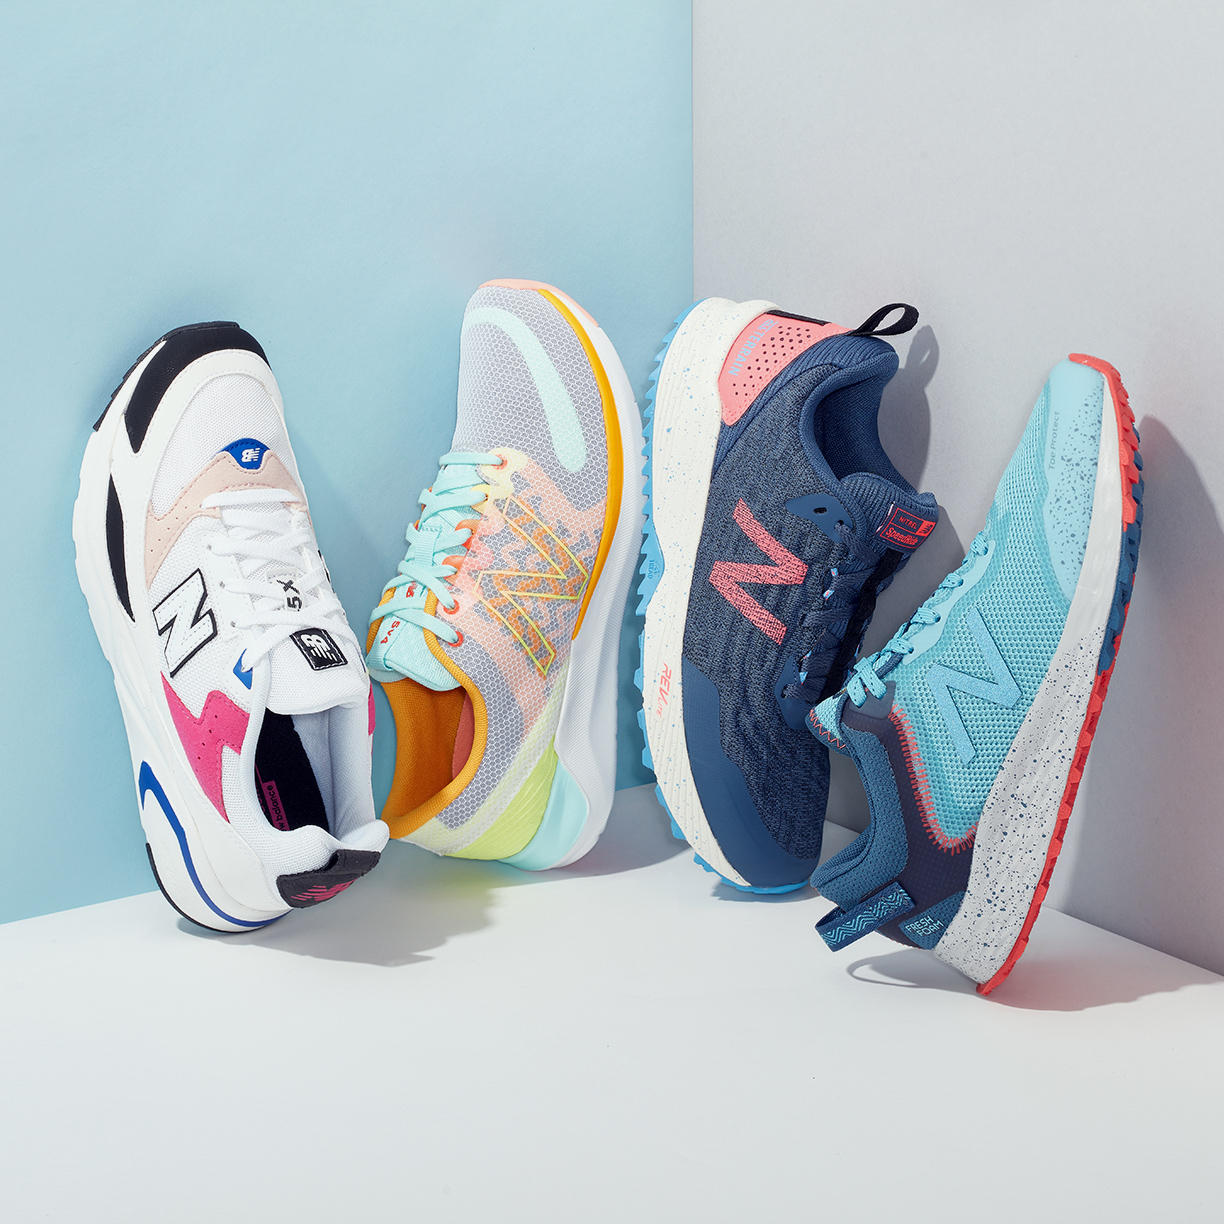 New Balance Shoes for the Family